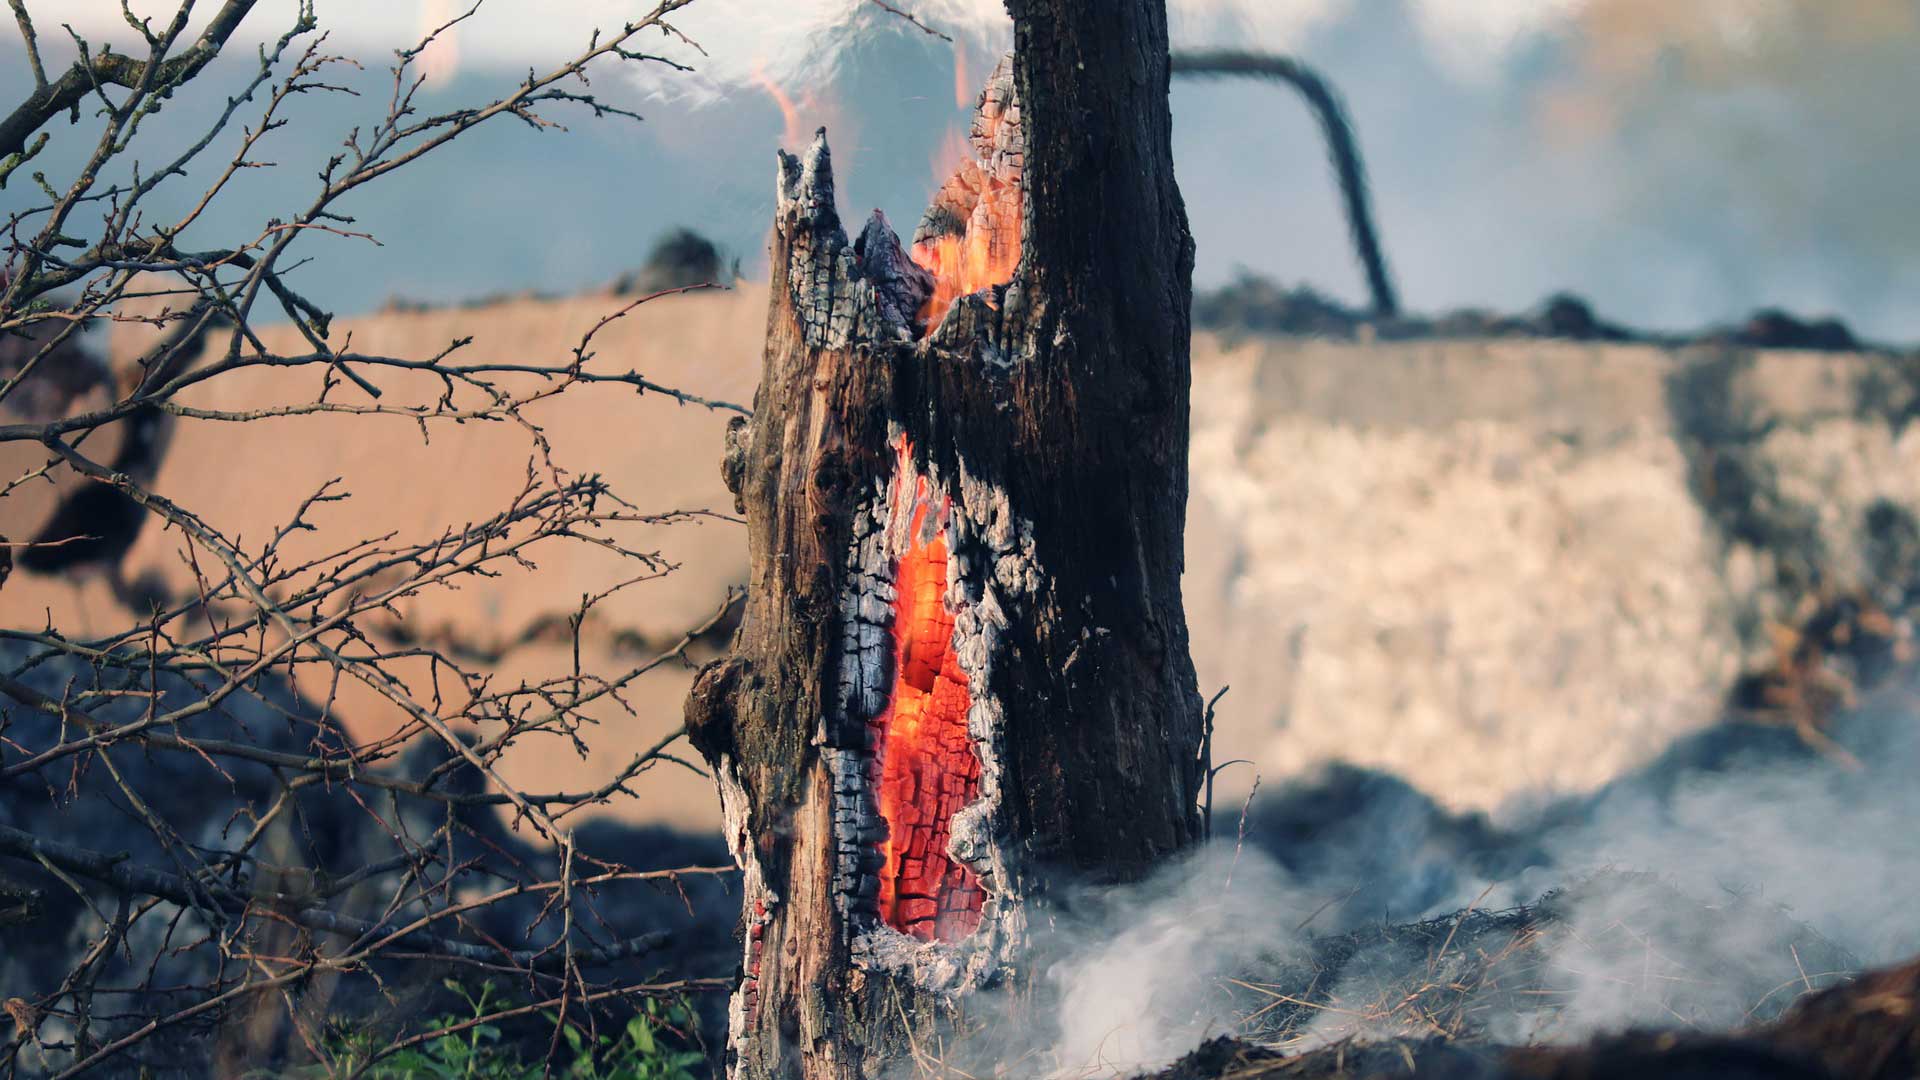 A tree stump burning after a wildfire in San Diego County, California.